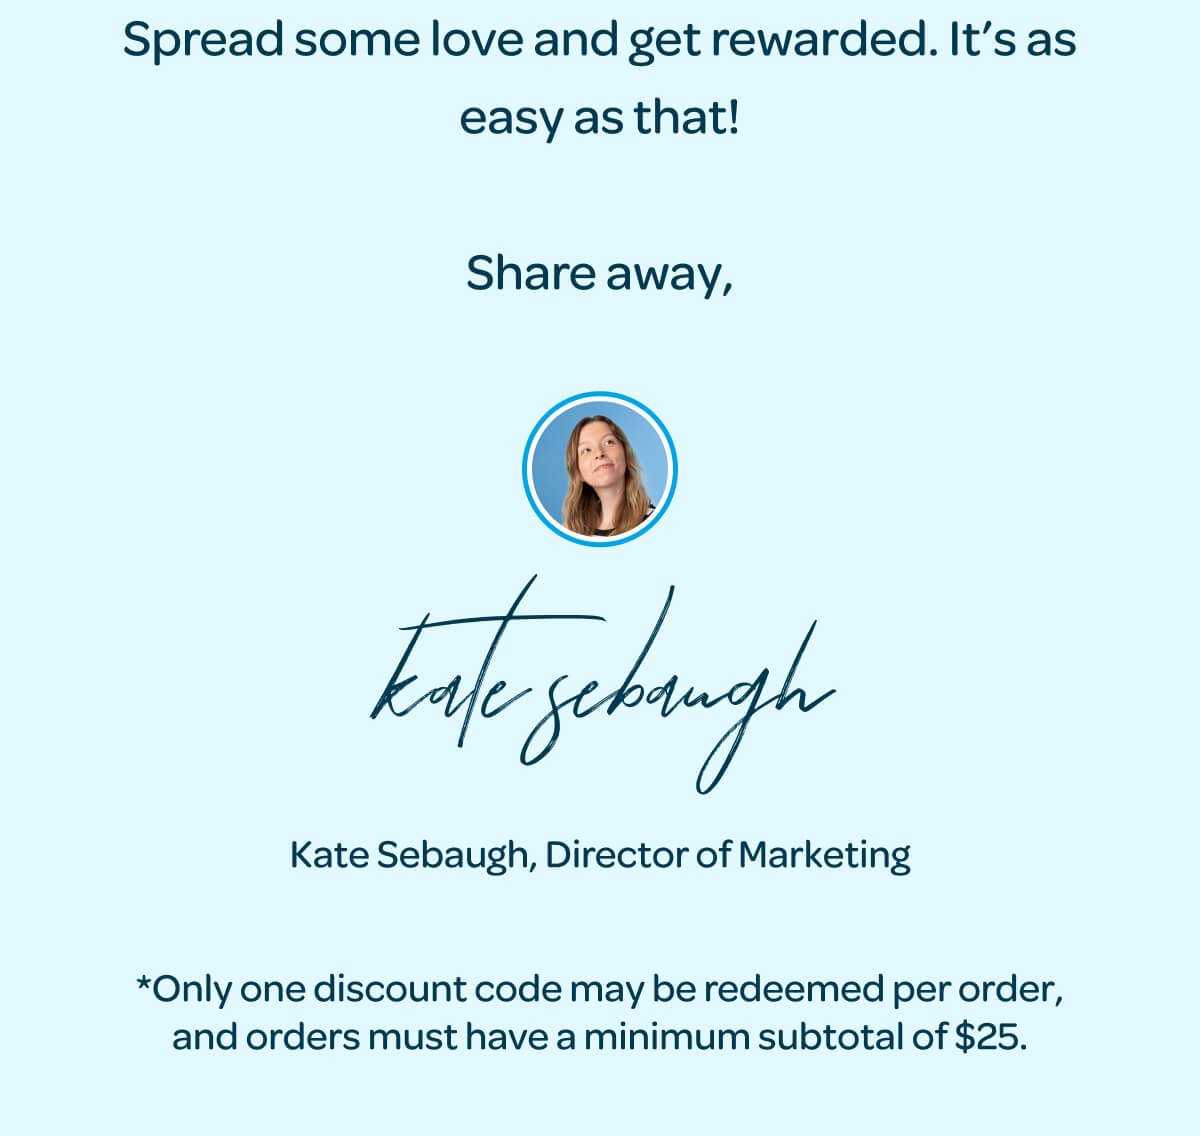 Spread some love and get rewarded. It’s as easy as that! Share away, Kate Sebaugh, Director of Marketing. *Only one discount code may be redeemed per order, and orders must have a minimum subtotal of \\$25.